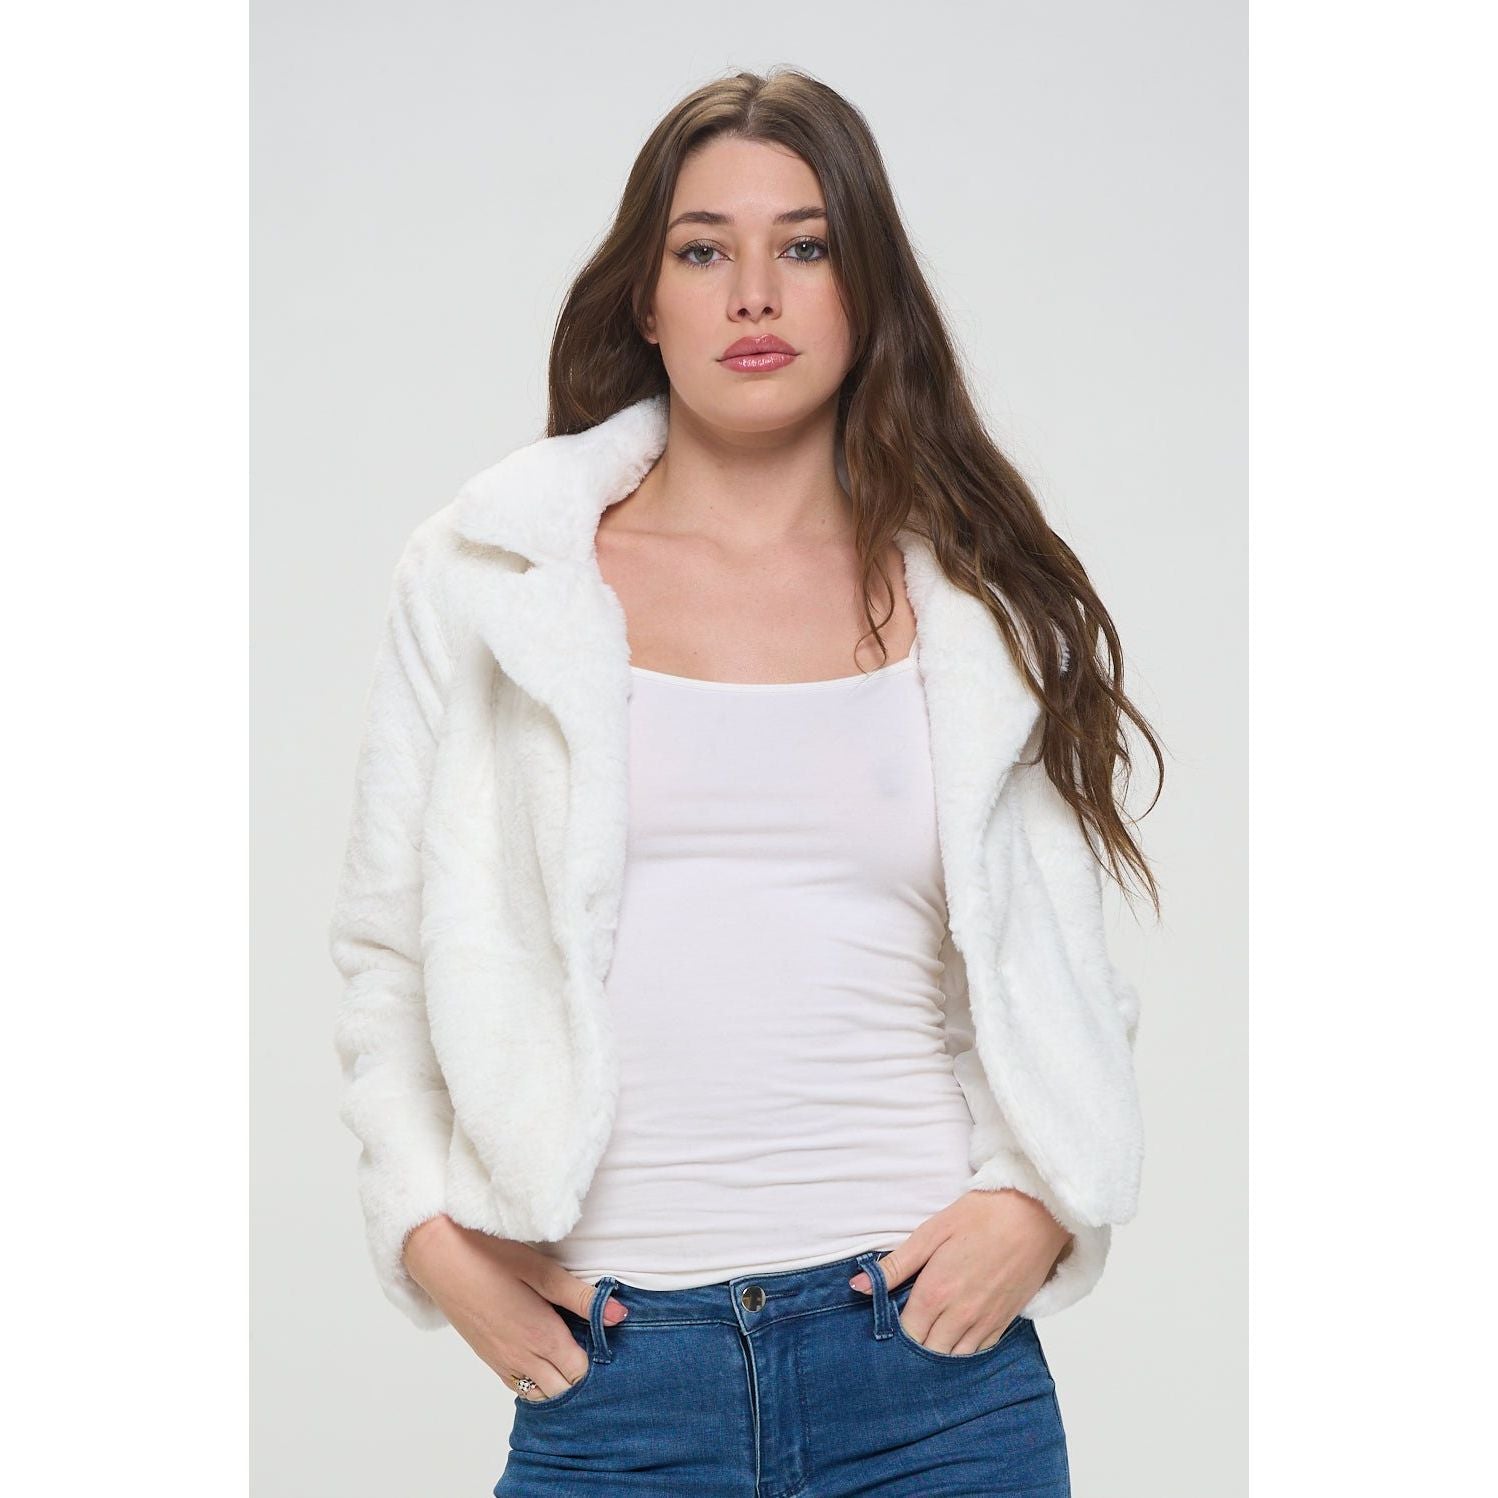 Ivory Flurry Fur Collar Jacket - Luxurious Faux-Fur Coat for Nighttime Glamour - KME means the very best